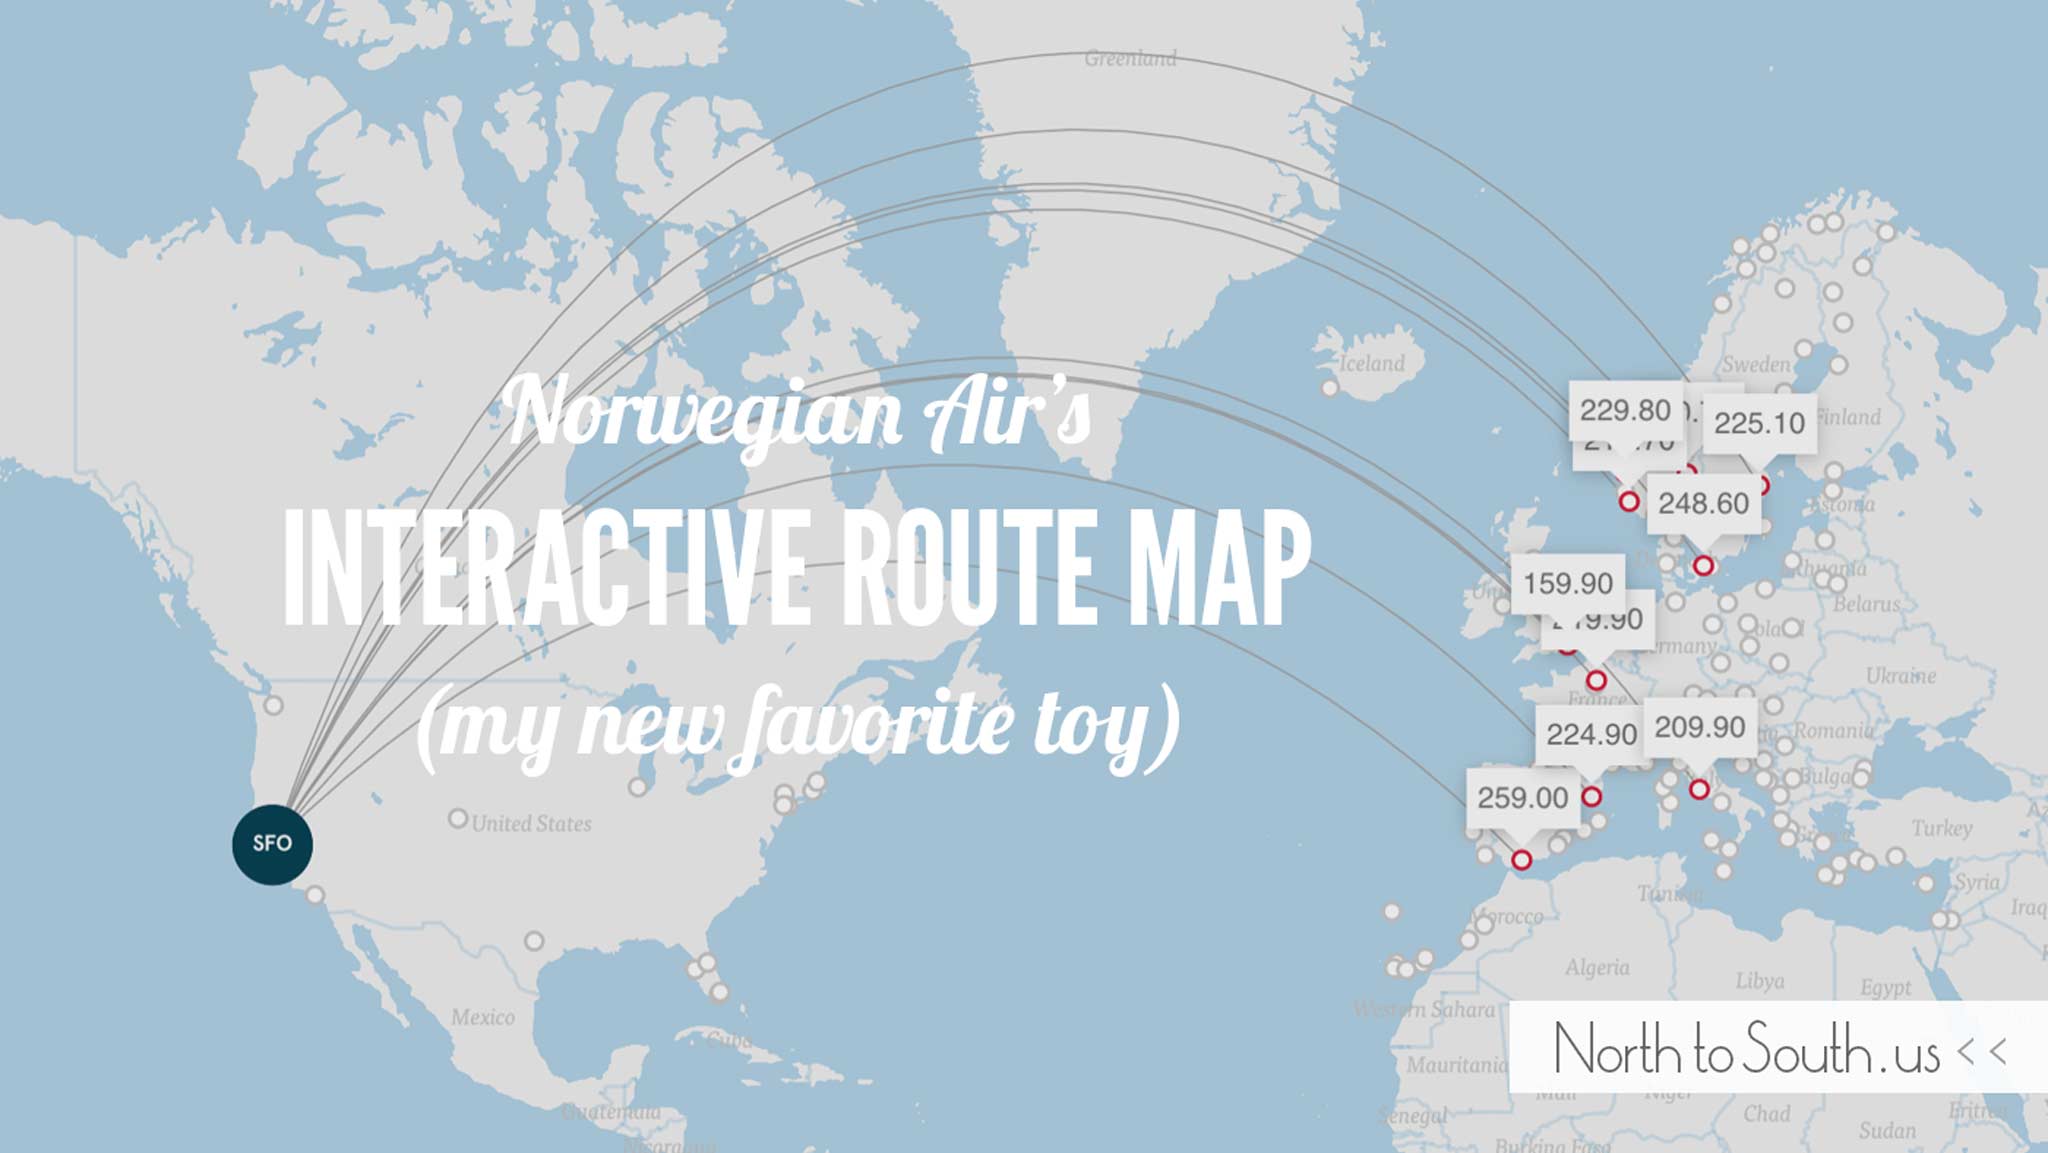 Norwegian Air's Interactive Route Map (my new favorite toy) | northtosouth.us